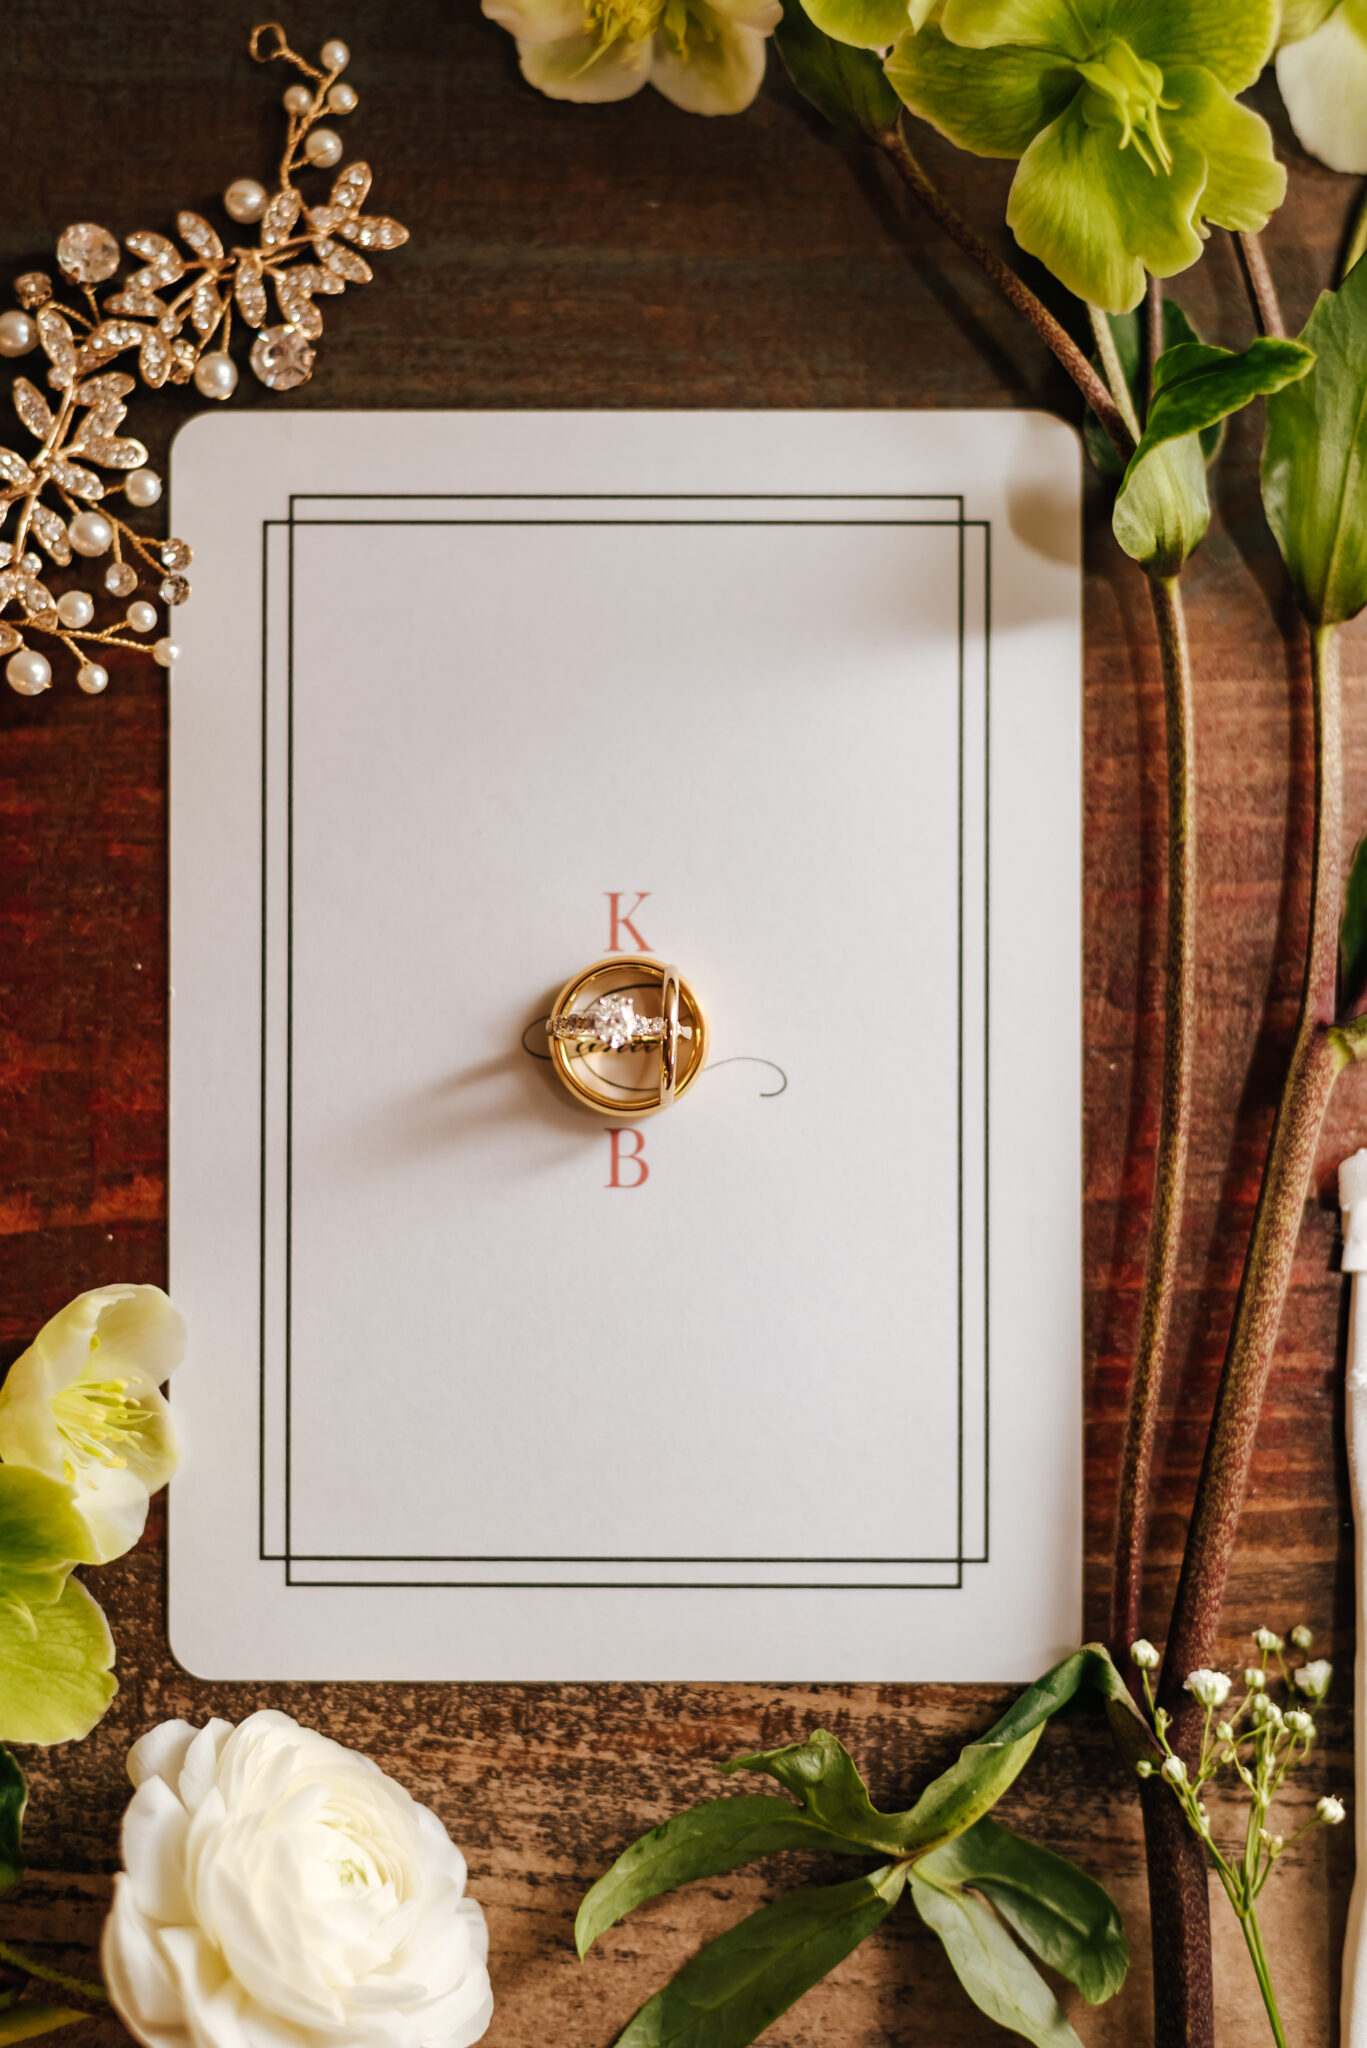 A simple white invitation with three gold rings arranged on top with greenery all around